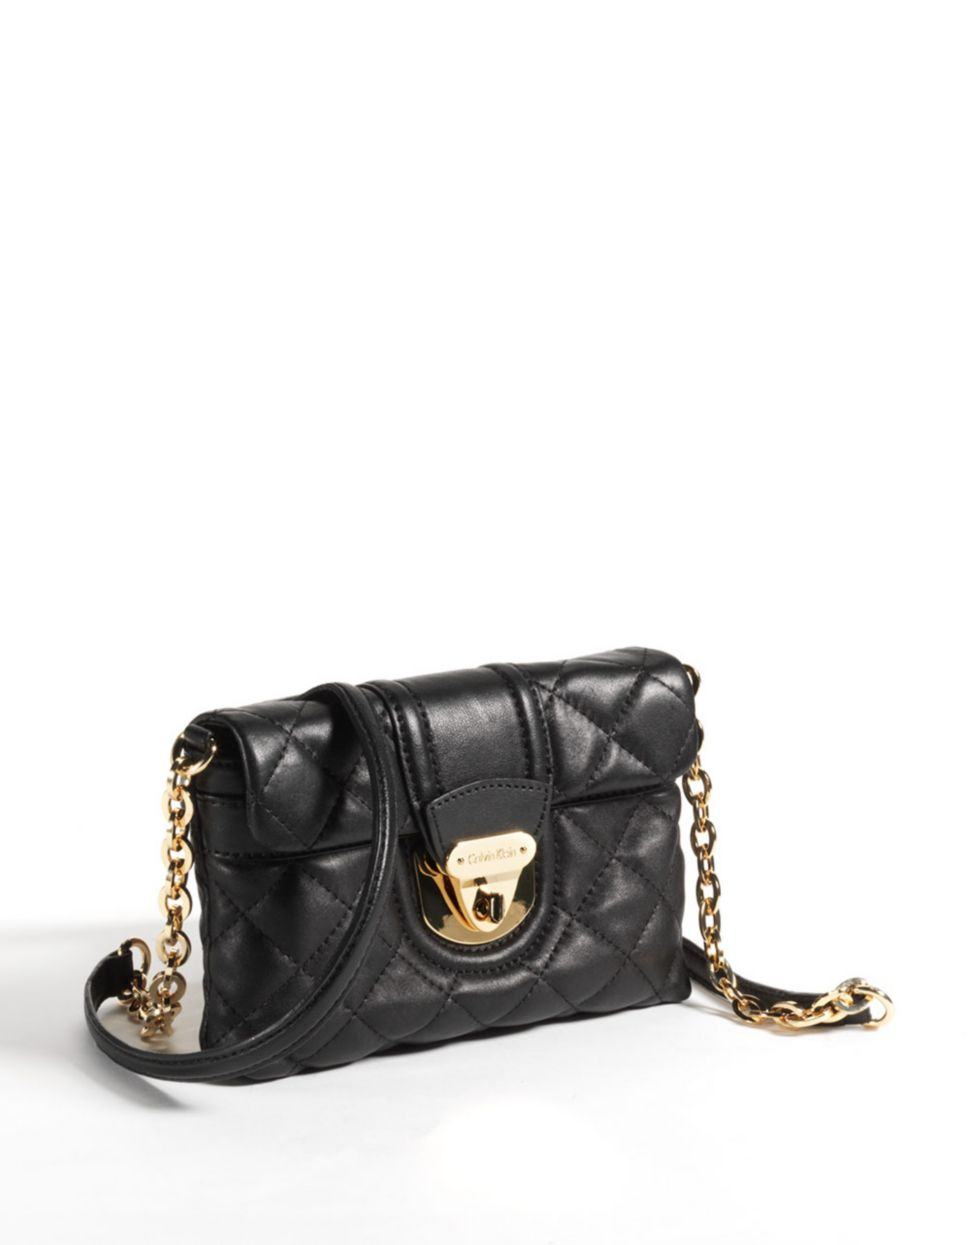 Calvin Klein Quilted Leather Crossbody Bag in Black - Lyst